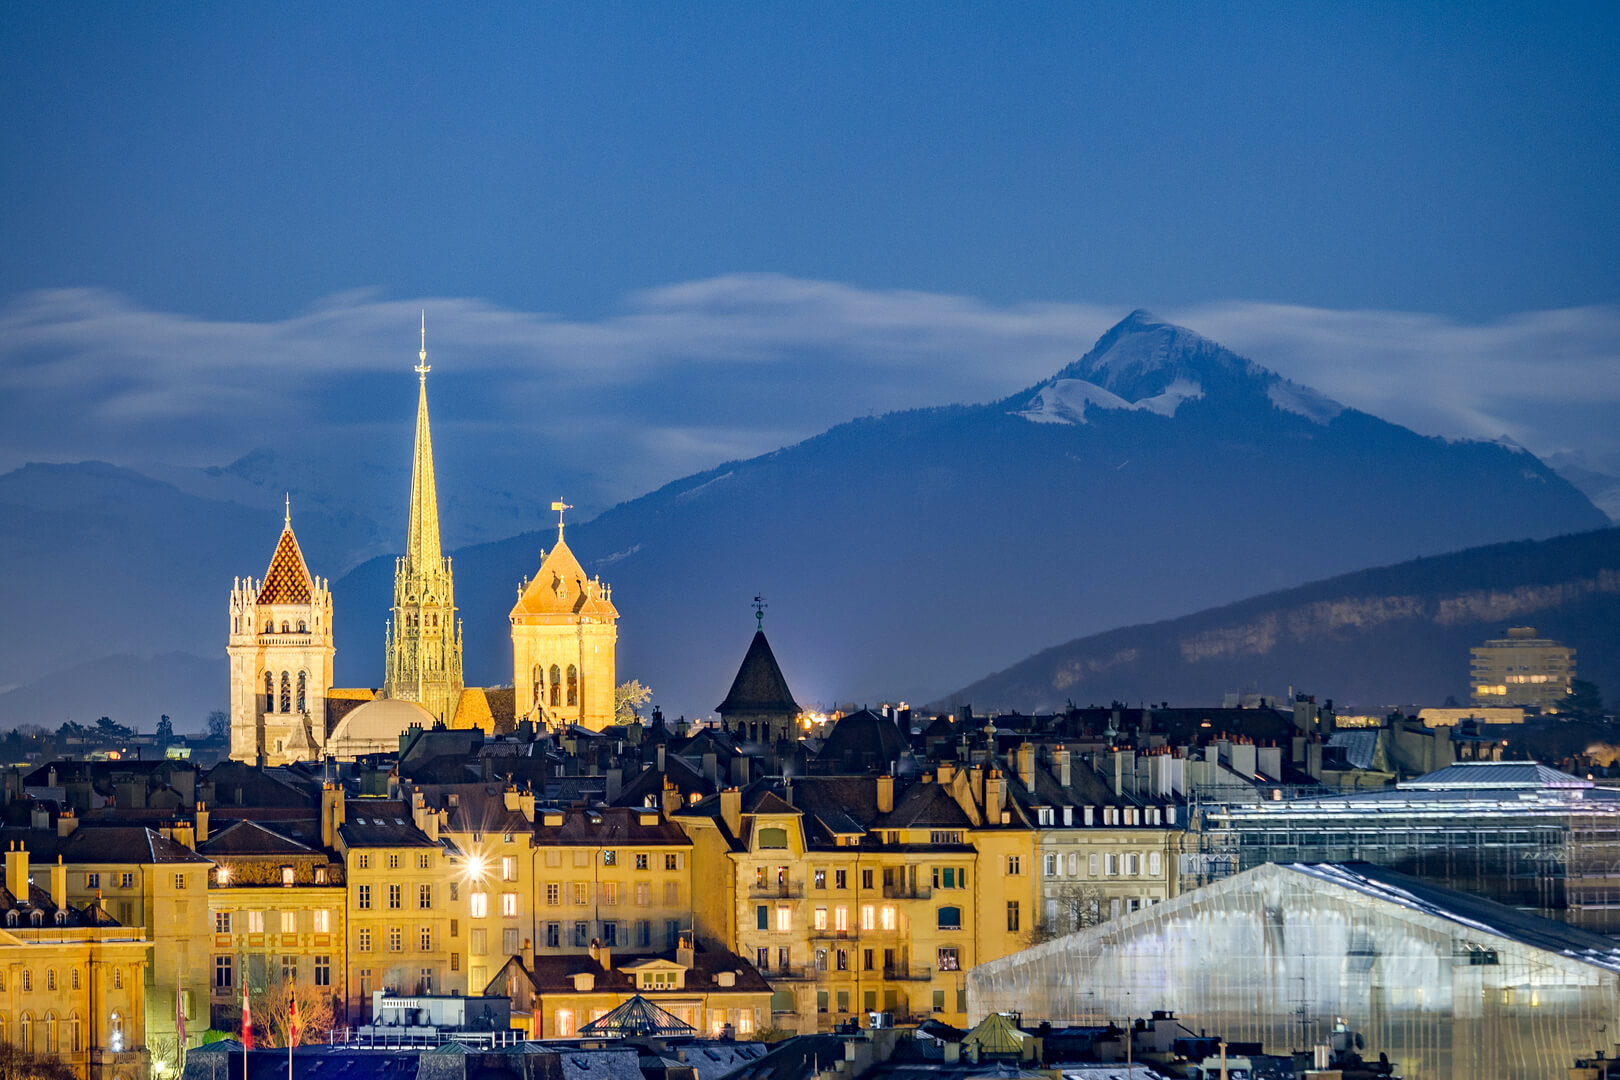 Night view of Geneva with the Alps and the Saint Pierre Cathedral